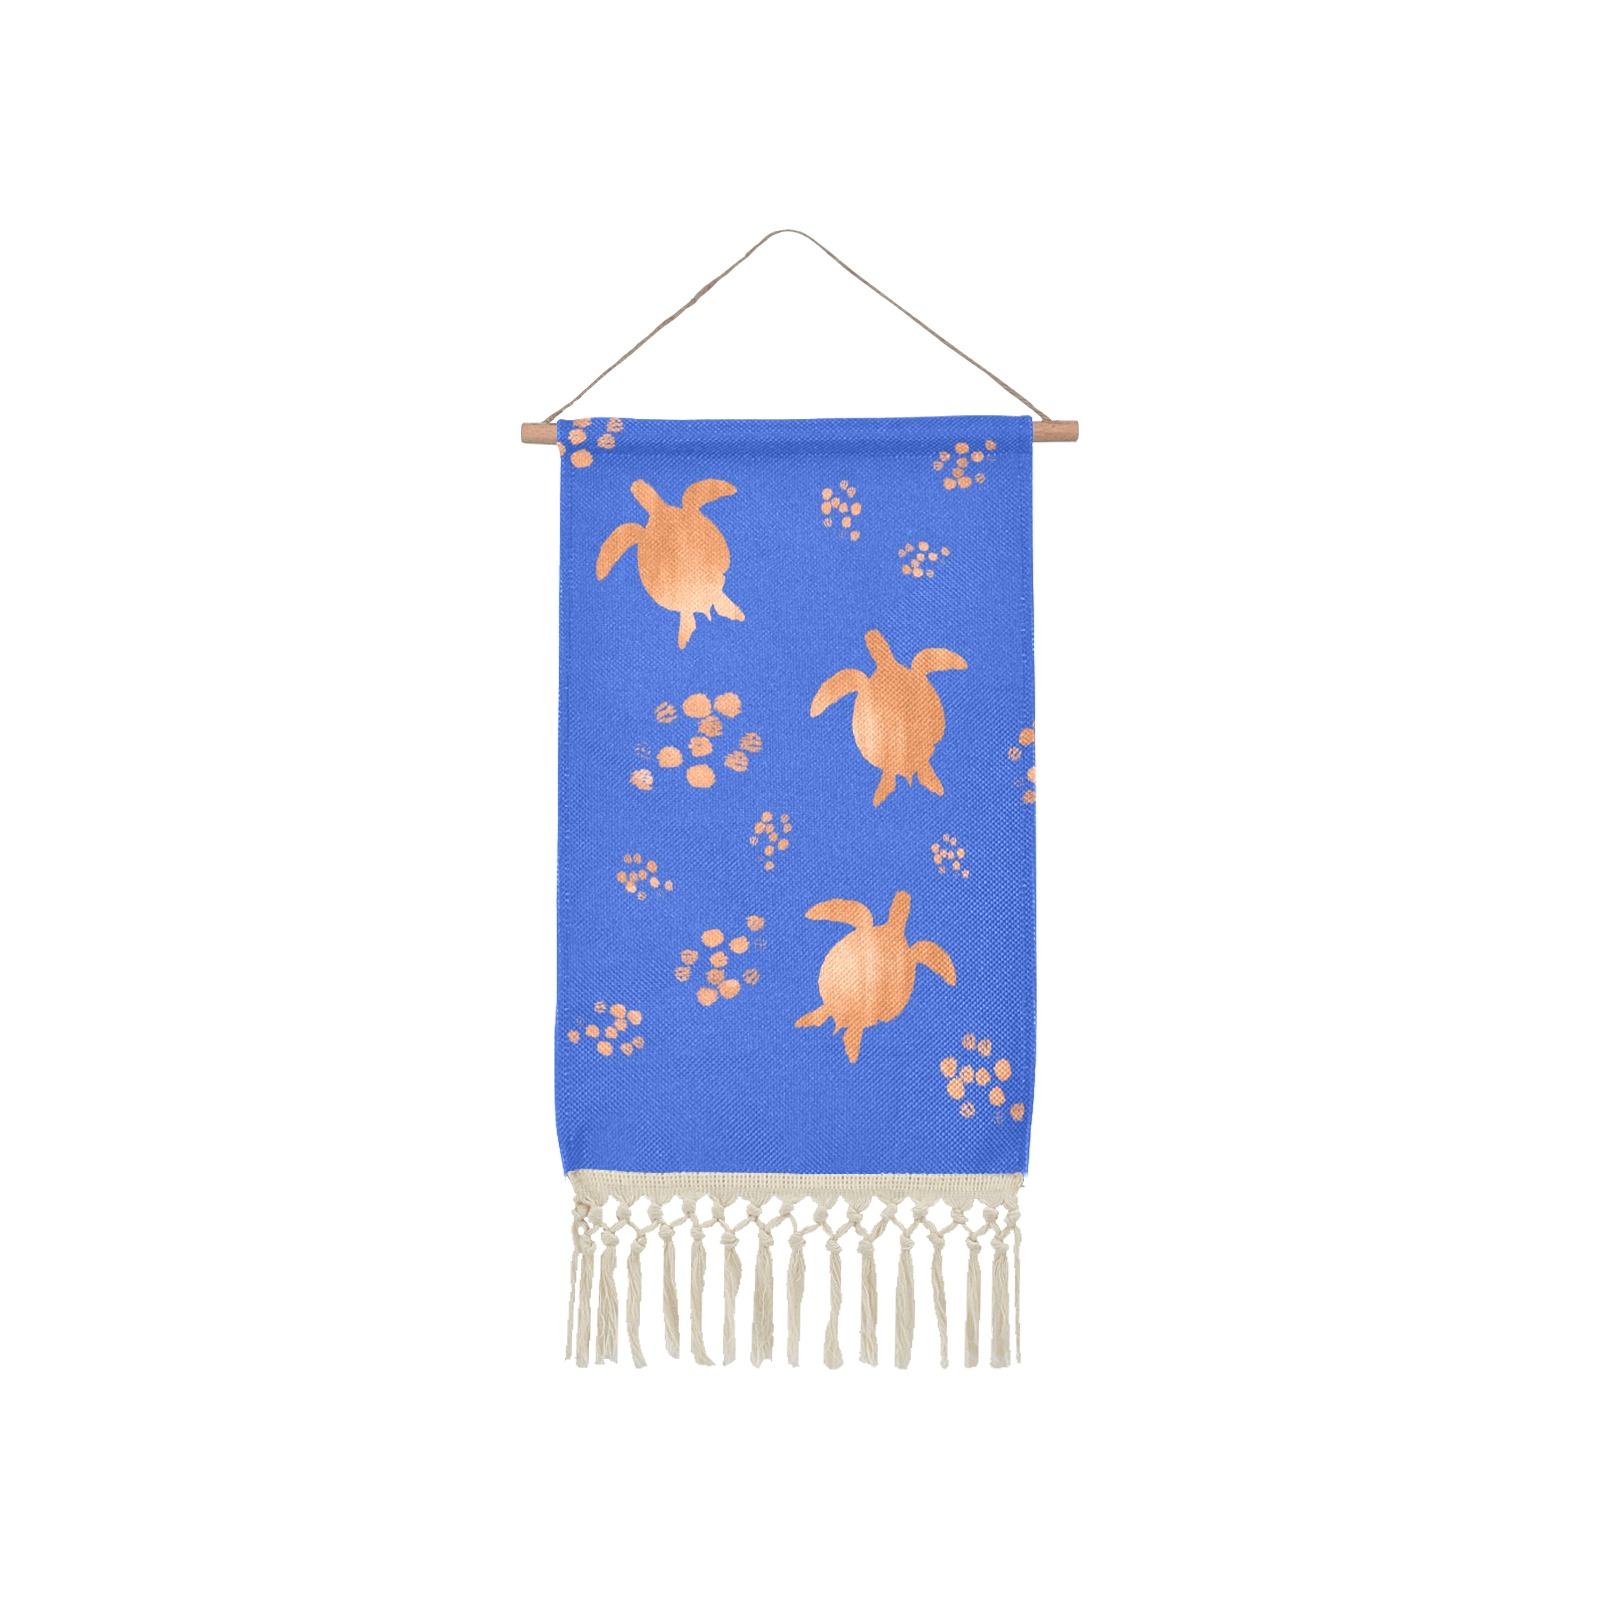 Sea Turtles on Blue Linen Hanging Poster